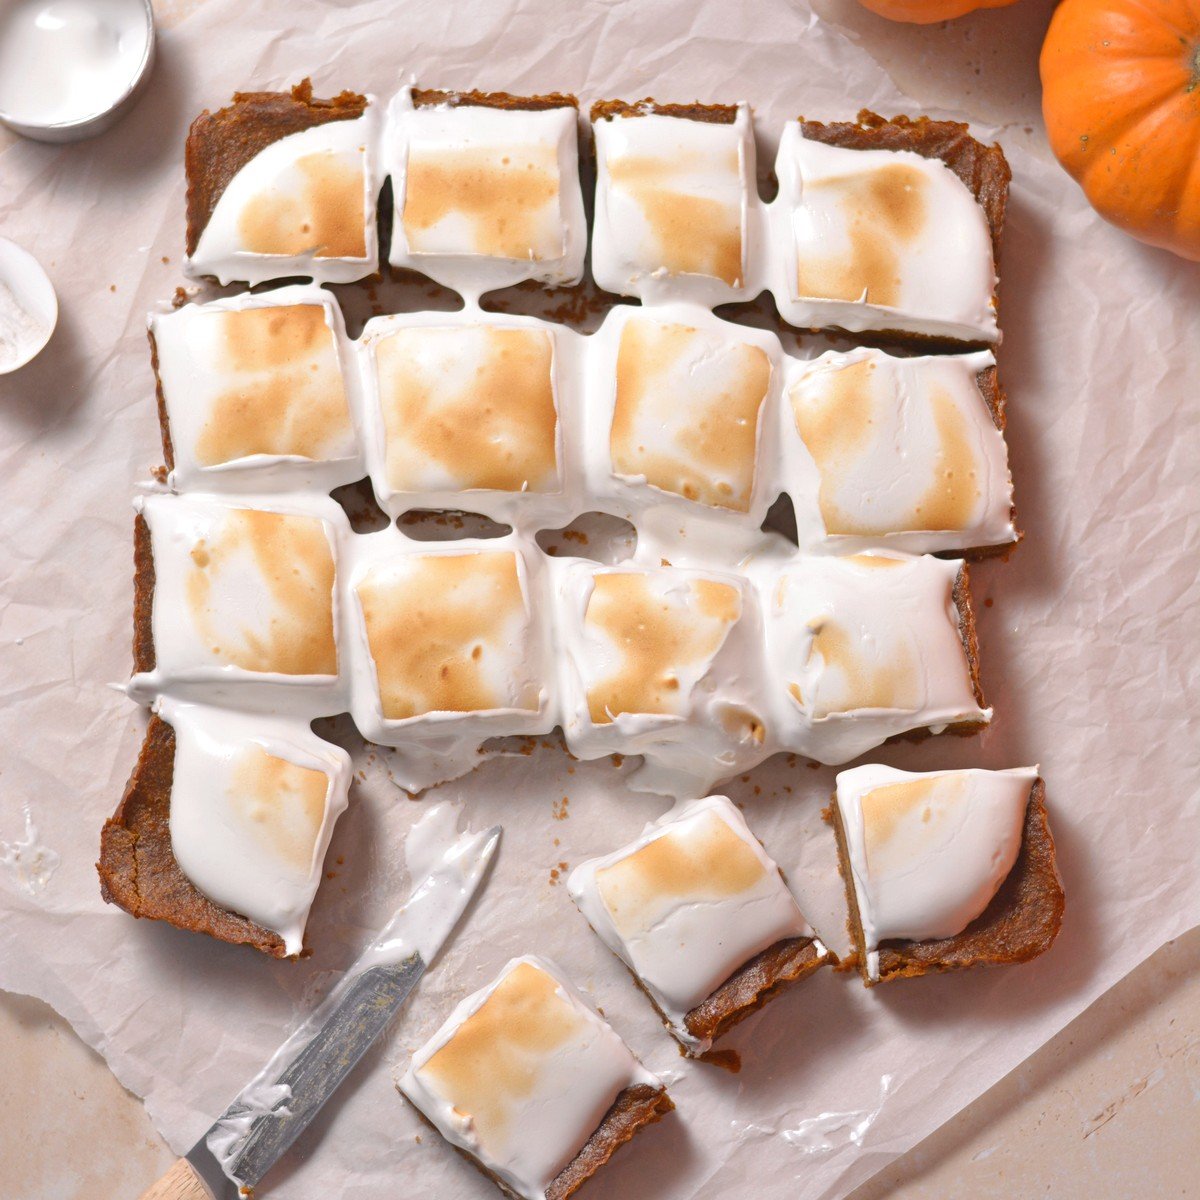 Pumpkin pie bars sliced into 16 even bars with toasted meringue topping.